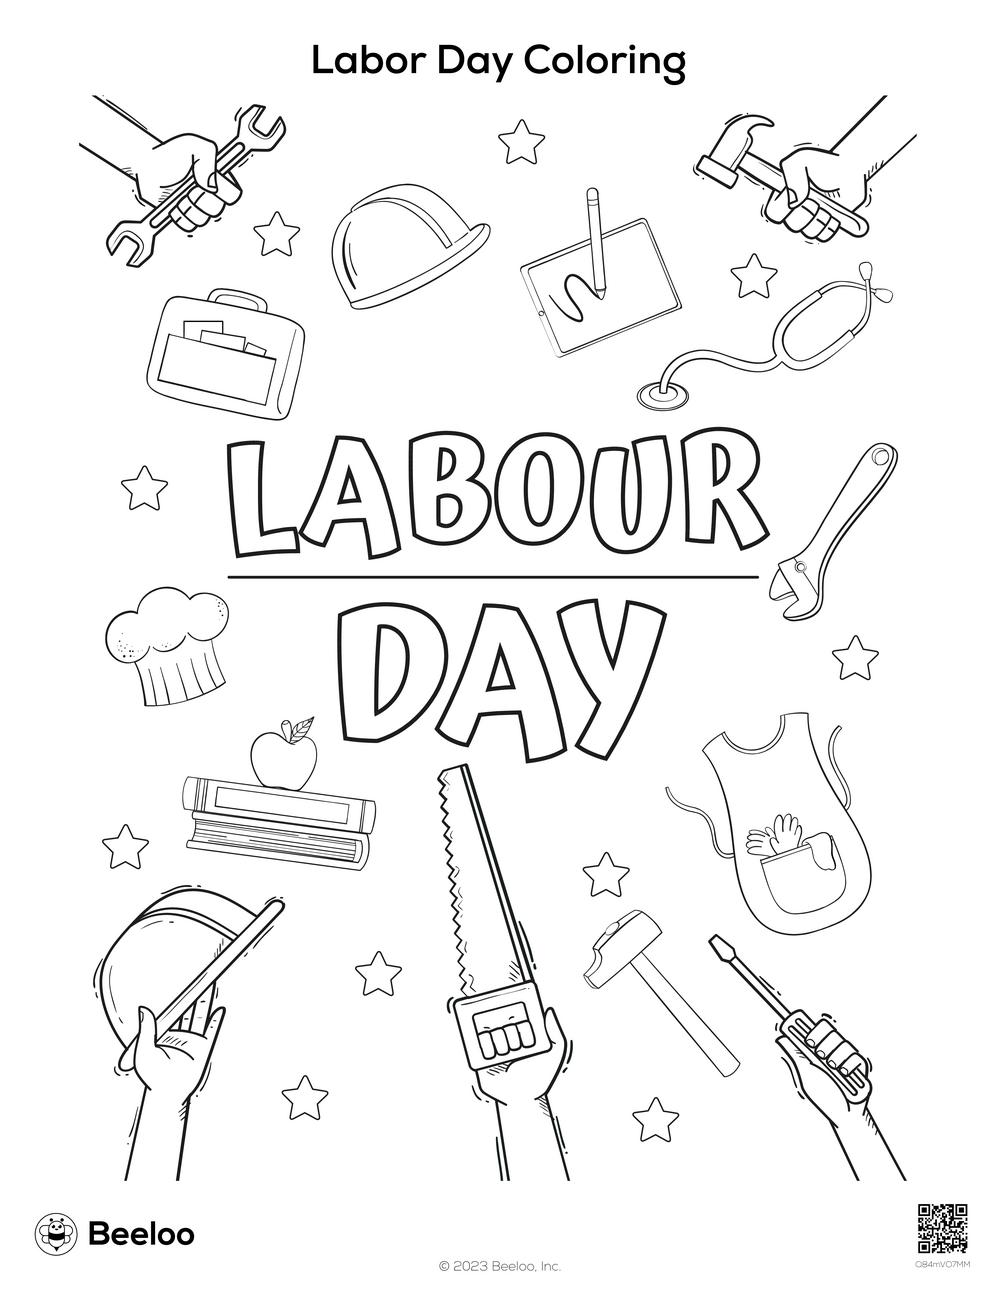 Labor day coloring â printable crafts and activities for kids